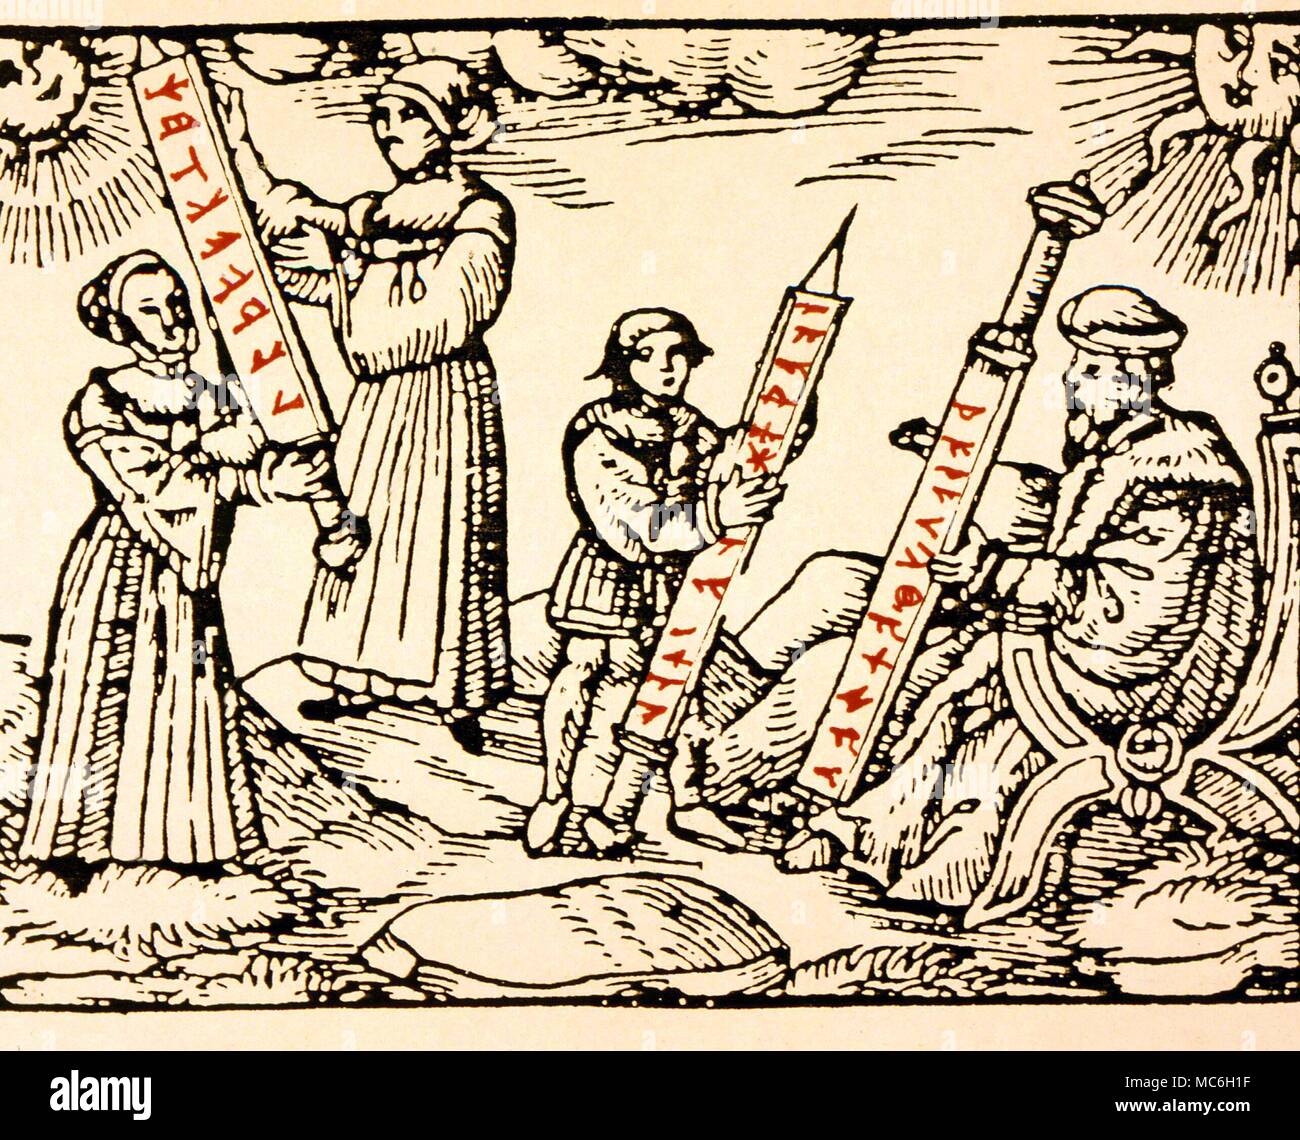 Rune sticks being used by magicians. Plate from Olaus Magnus, 1658 translation of 'A Compendious History of the Goths, Swedes and Vandals'. Private Collection Stock Photo